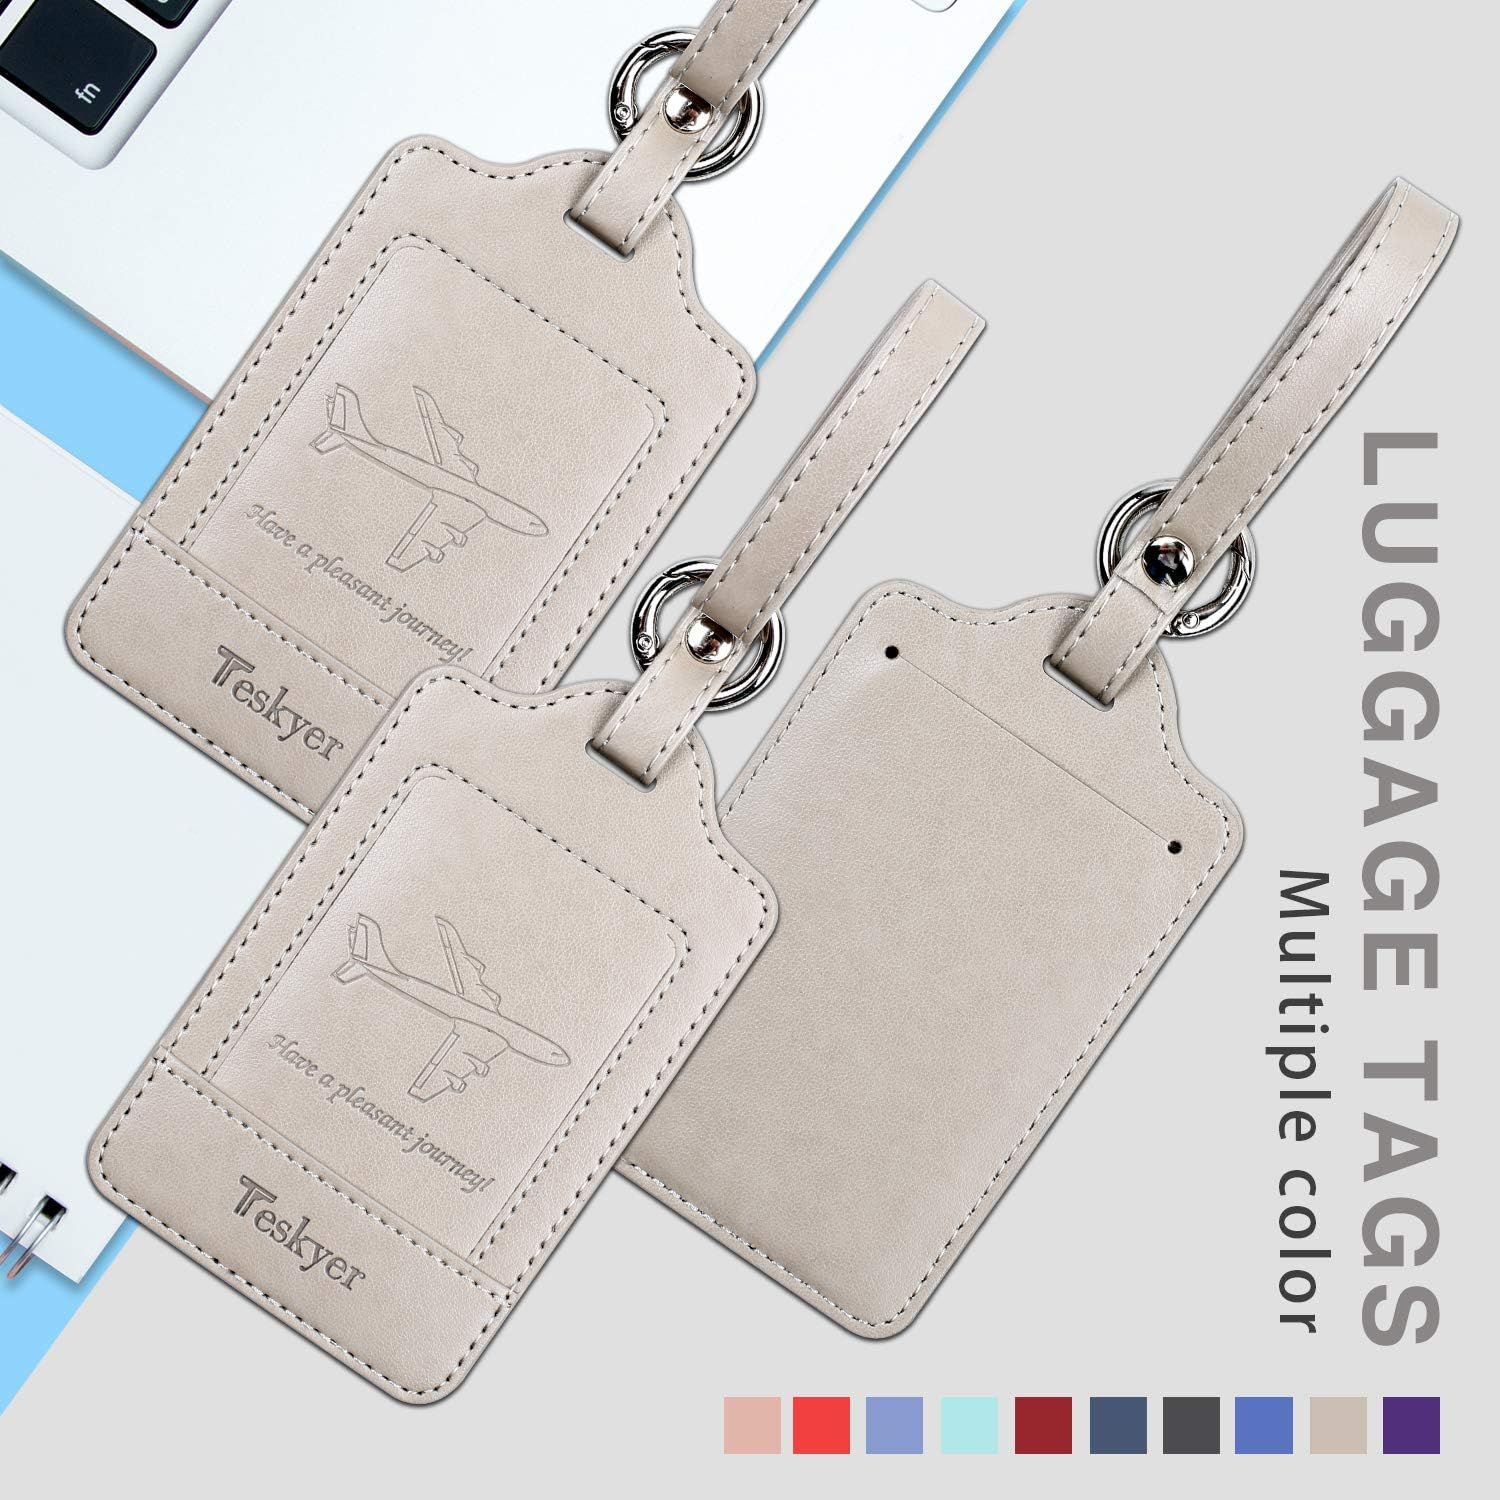 Teskyer Luggage Tags, 3 Pack Premium PU Leahter Luggage Tags Privacy Protection Travel Bag Labels Su | Amazon (US)